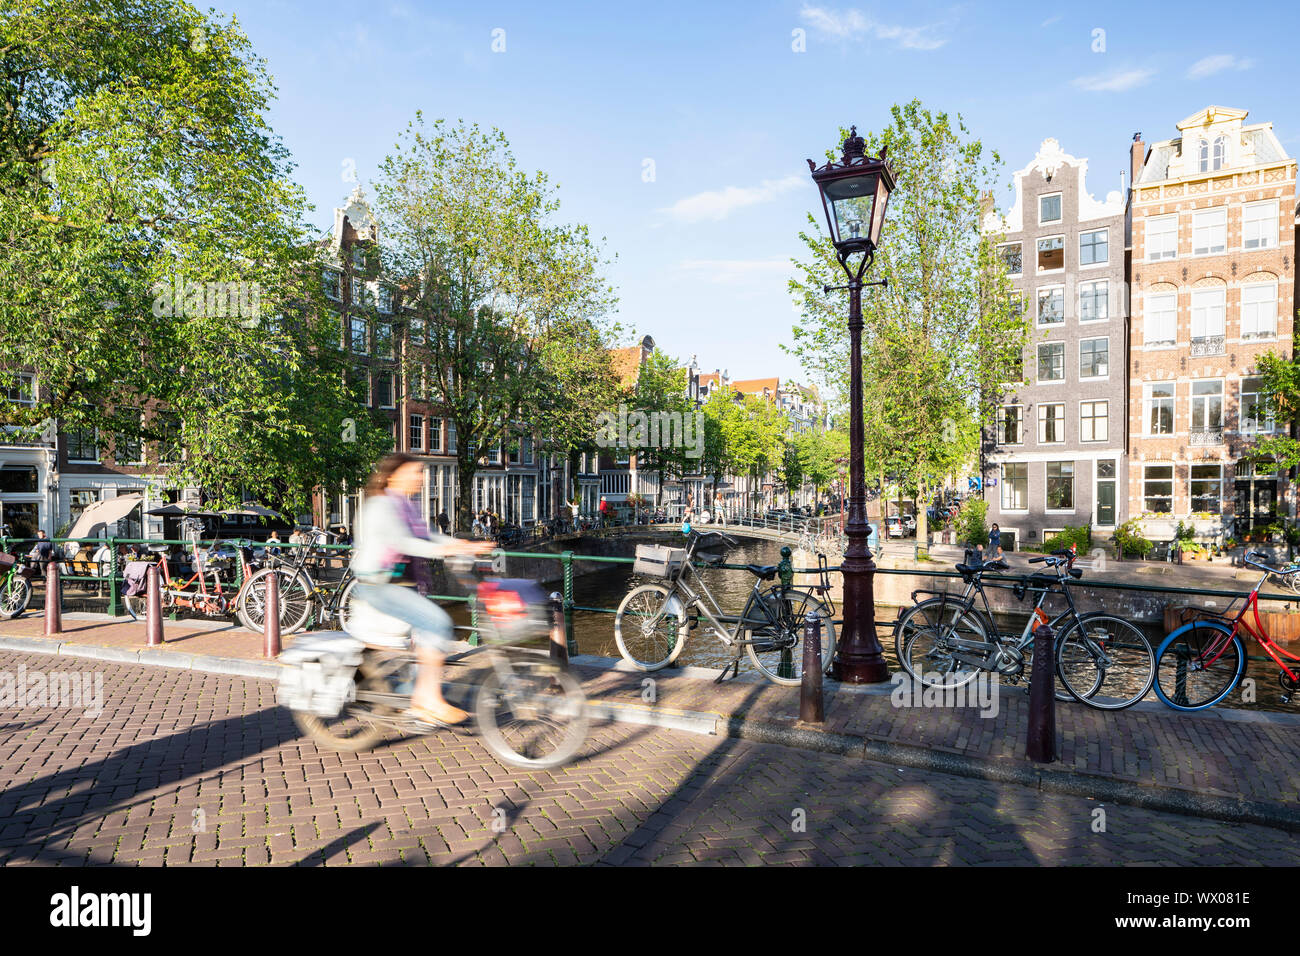 The Herengracht Canal in Amsterdam, North Holland, The Netherlands, Europe Stock Photo